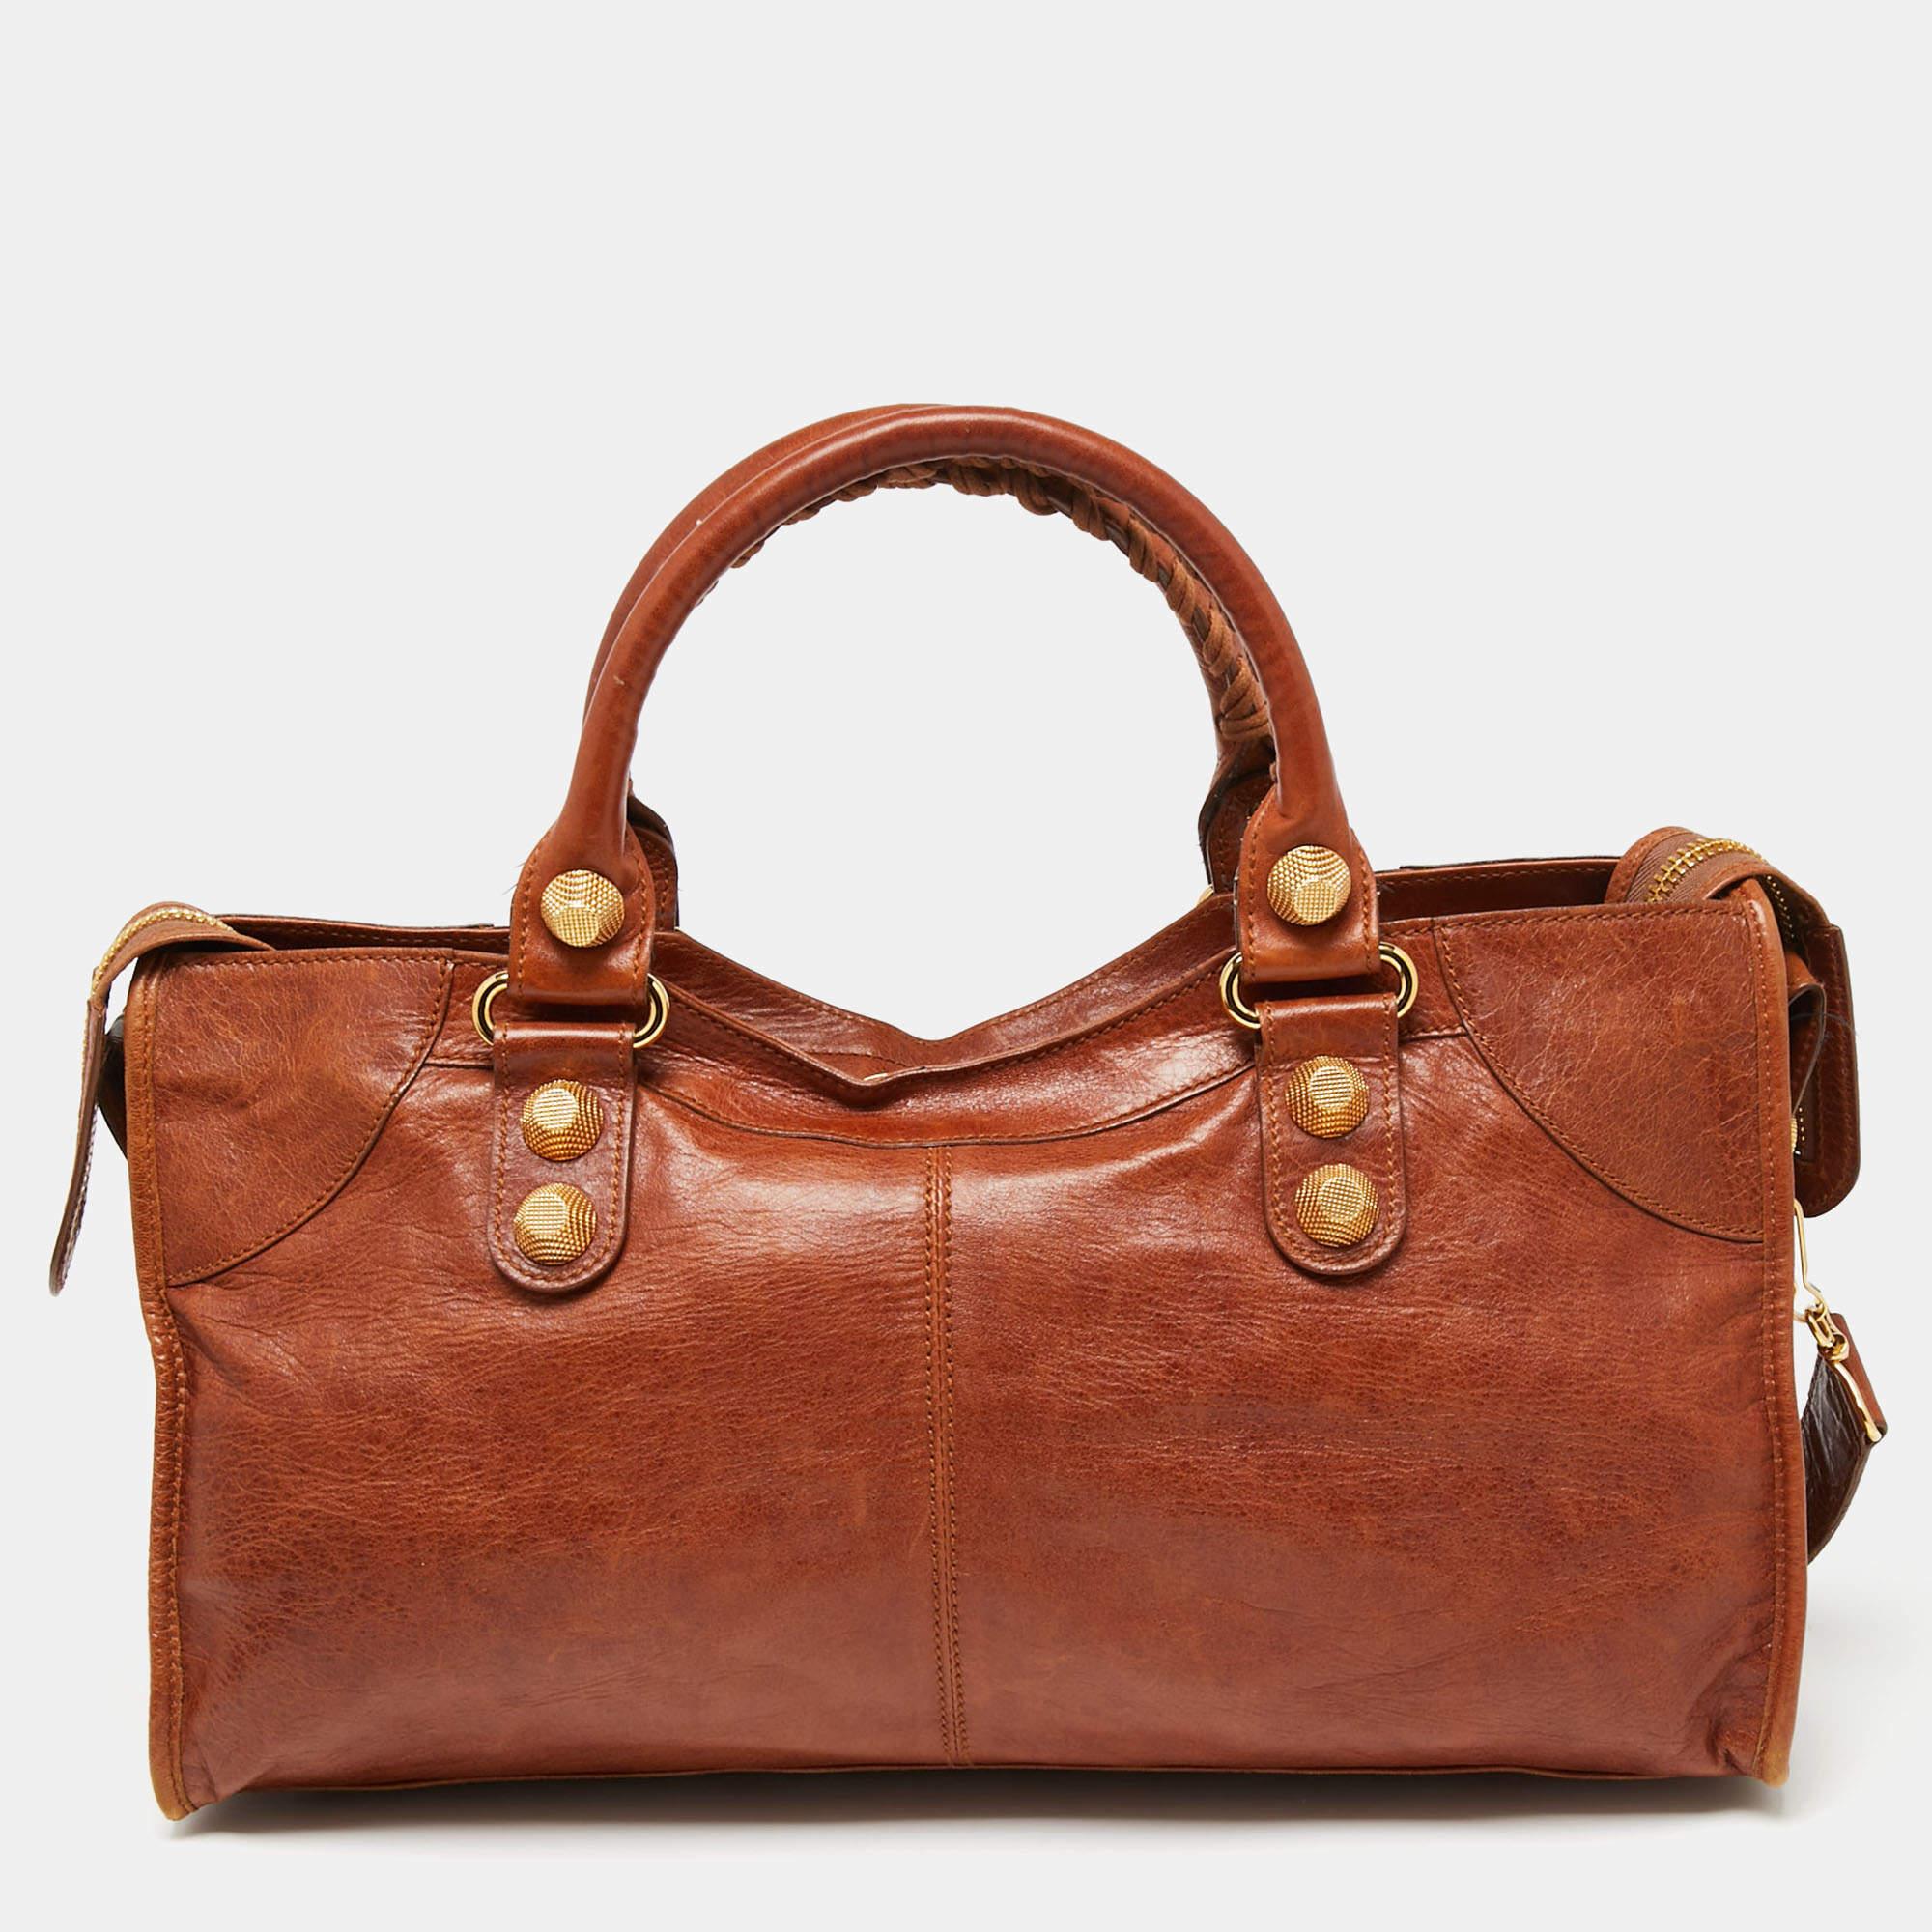 When in doubt, trust the classics. This Balenciaga GGH Part Time leather bag is offered in a delighting brown. The timeless silhouette is paired with gold-tone hardware and fitted with two top handles and a shoulder strap. Make a worthy investment